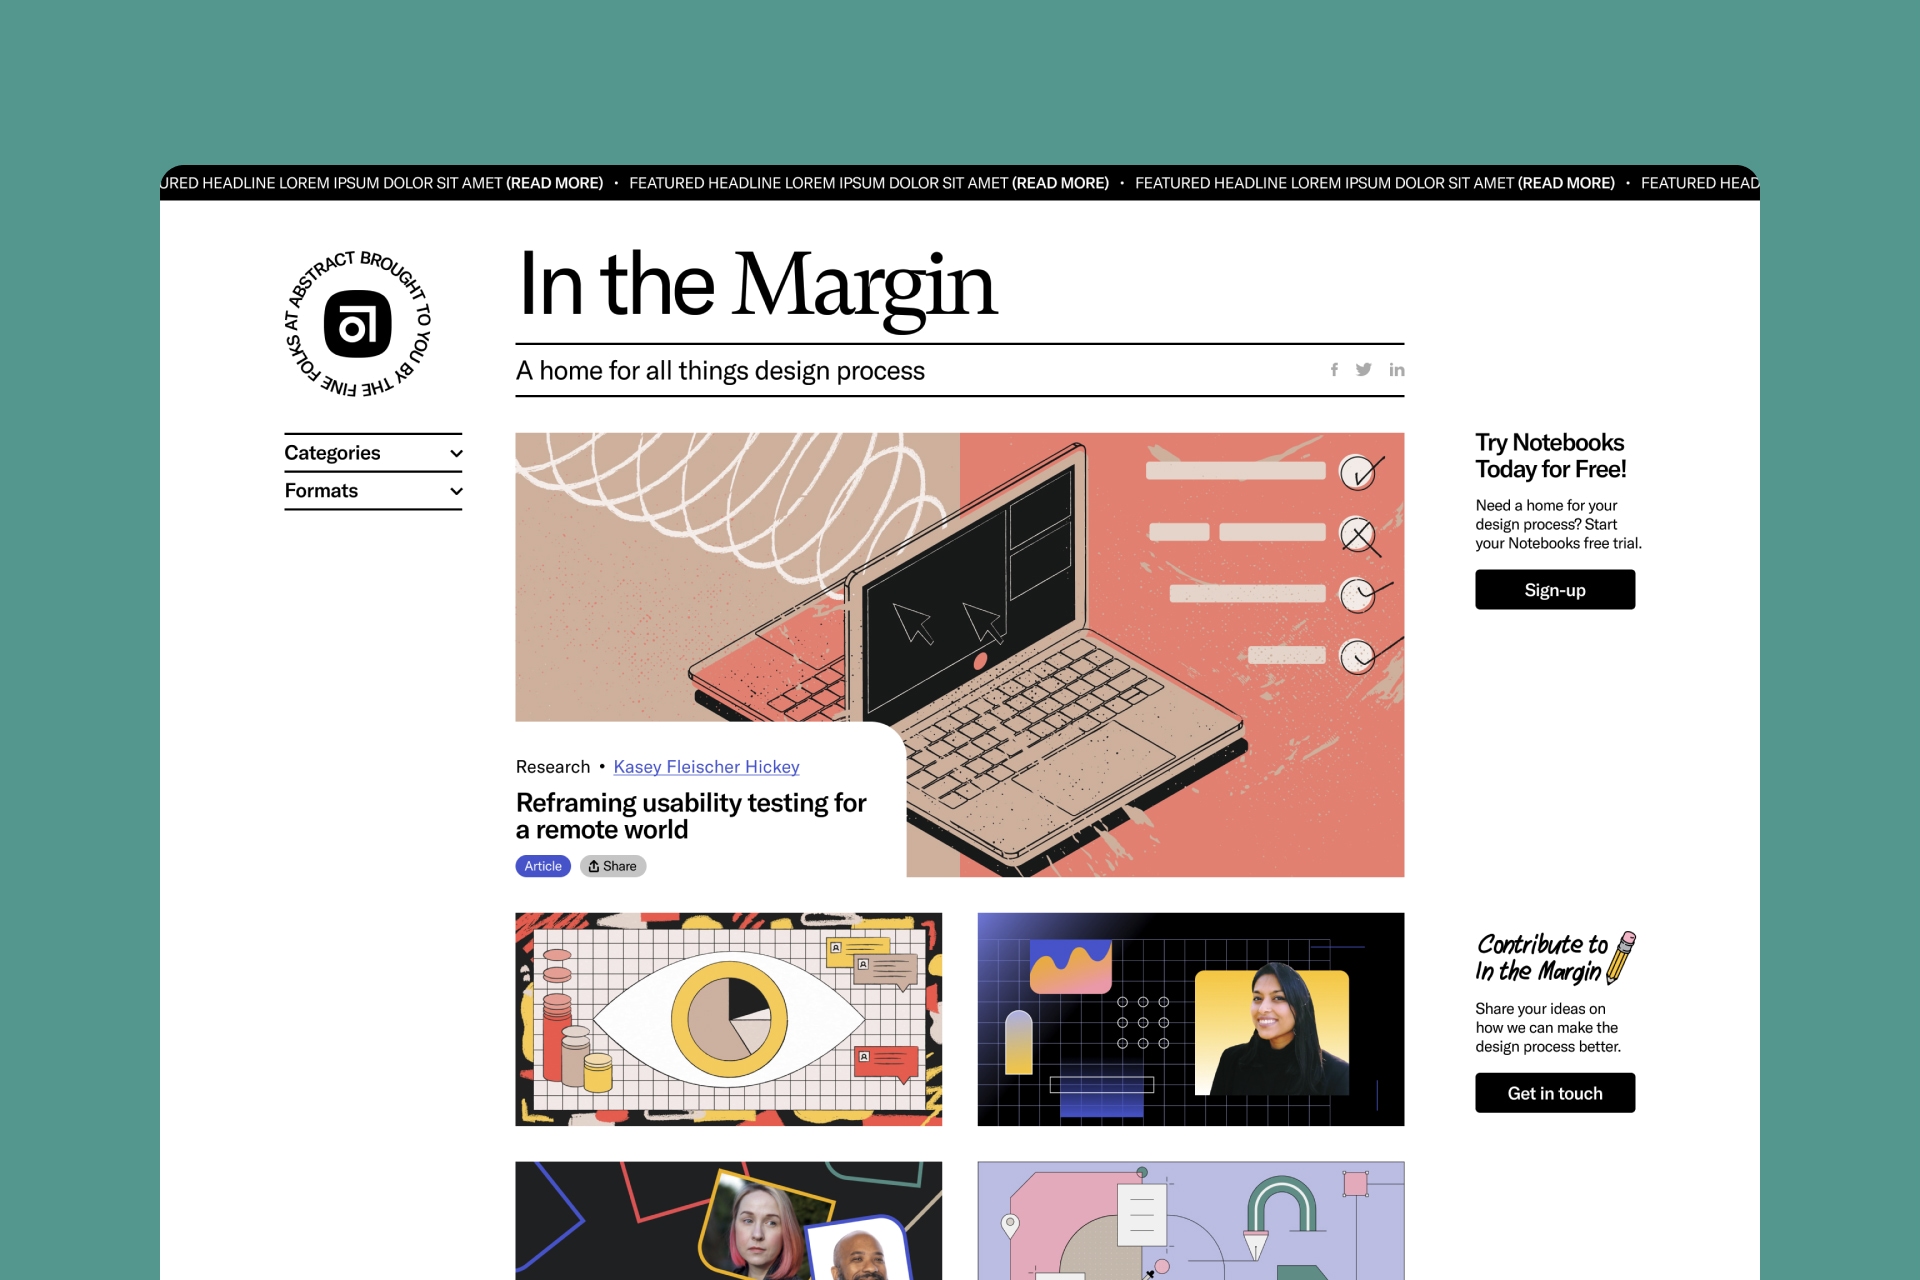 A screenshot of In the Margin's Landing Page